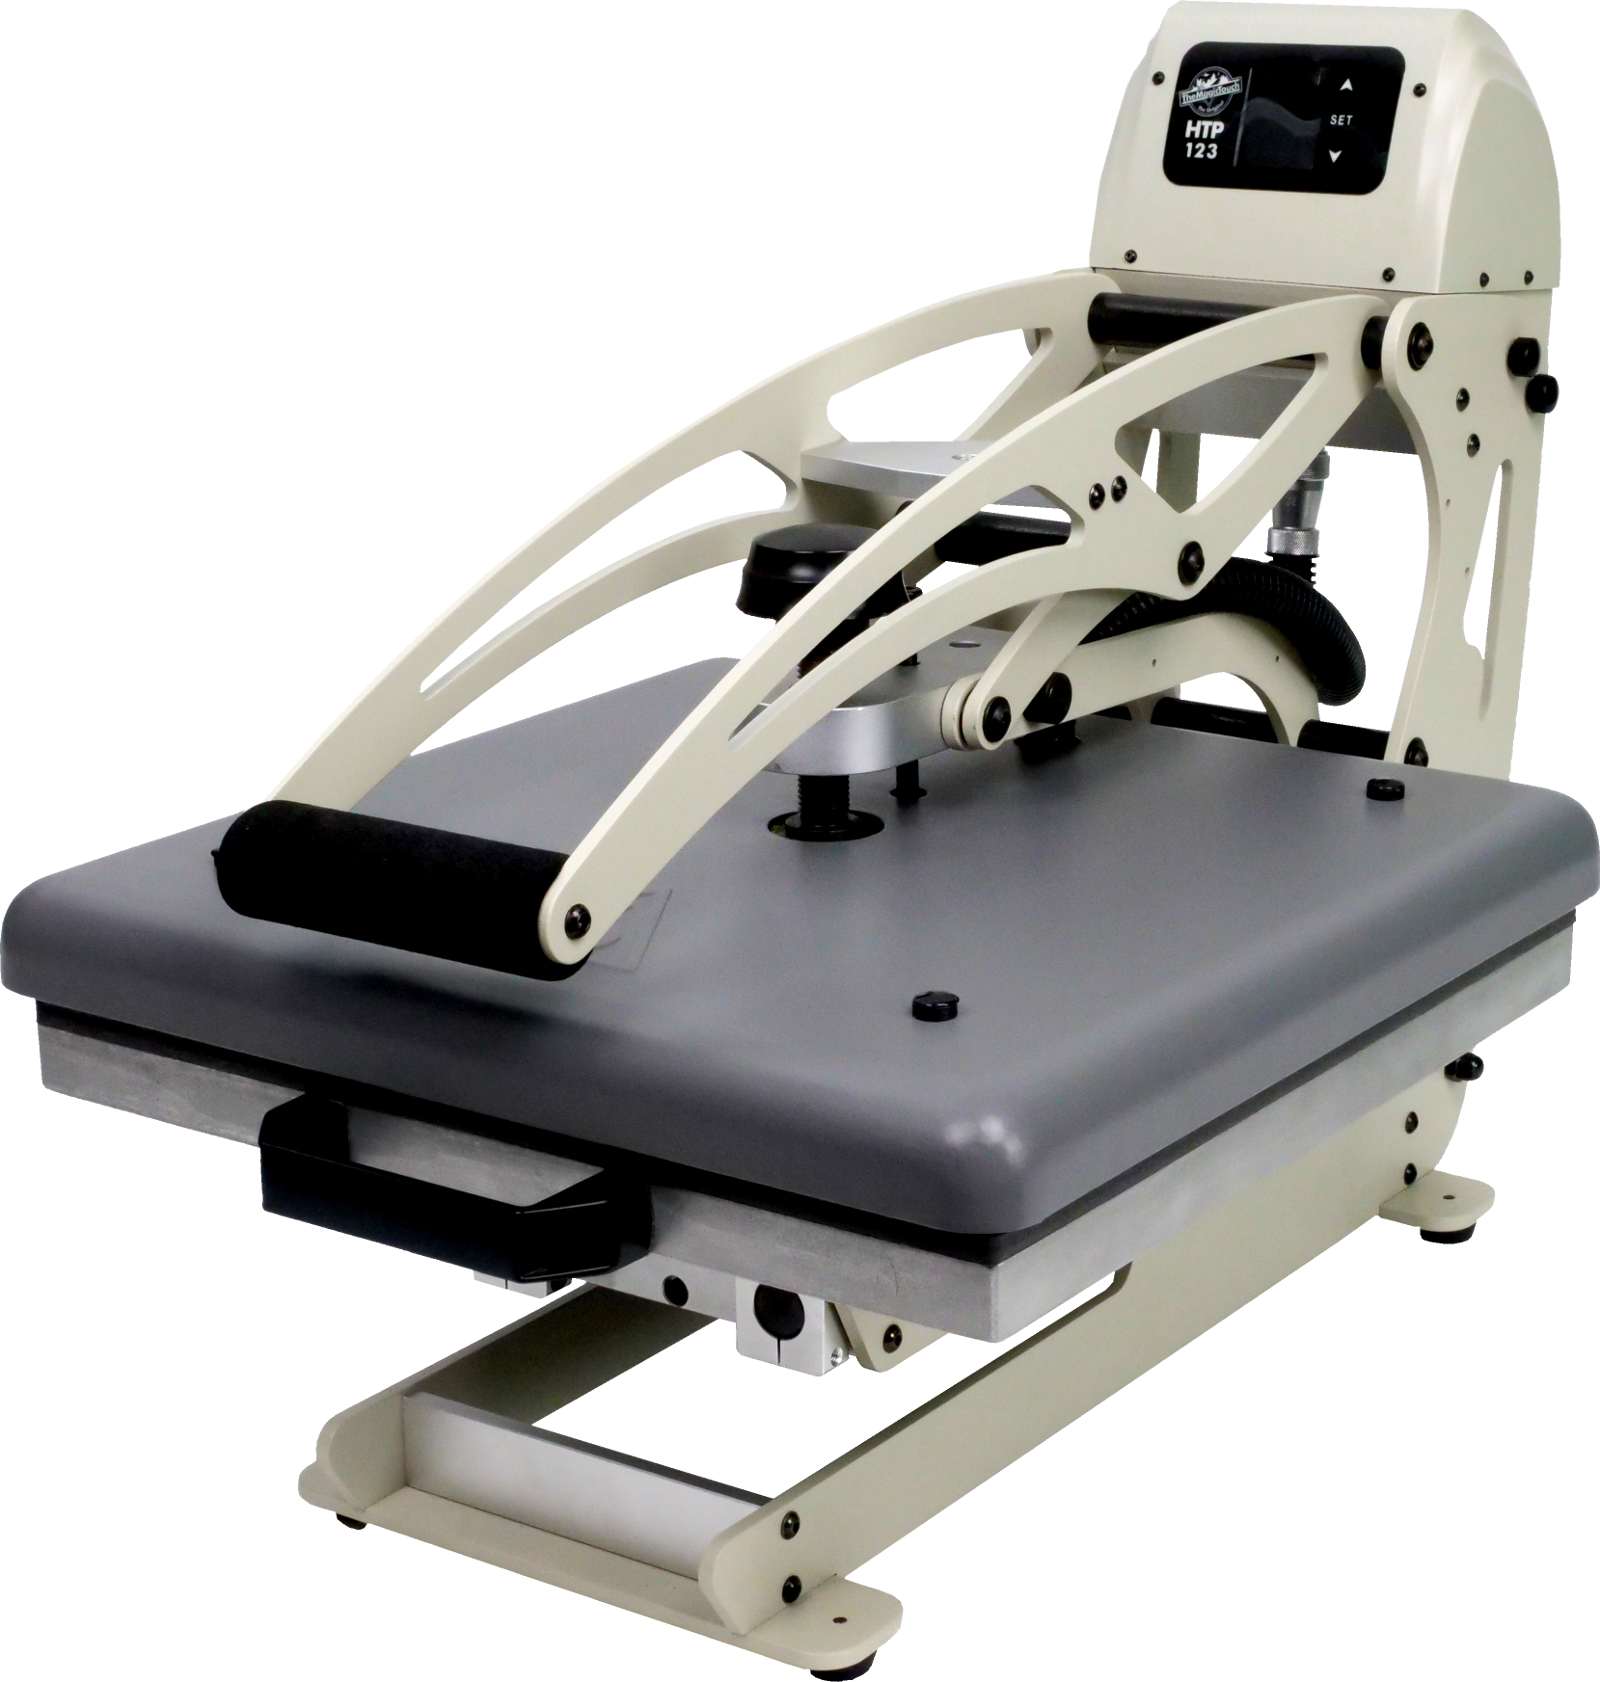 HTP123 Pro Heat Press Including 3 x Additional Platens - TheMagicTouch